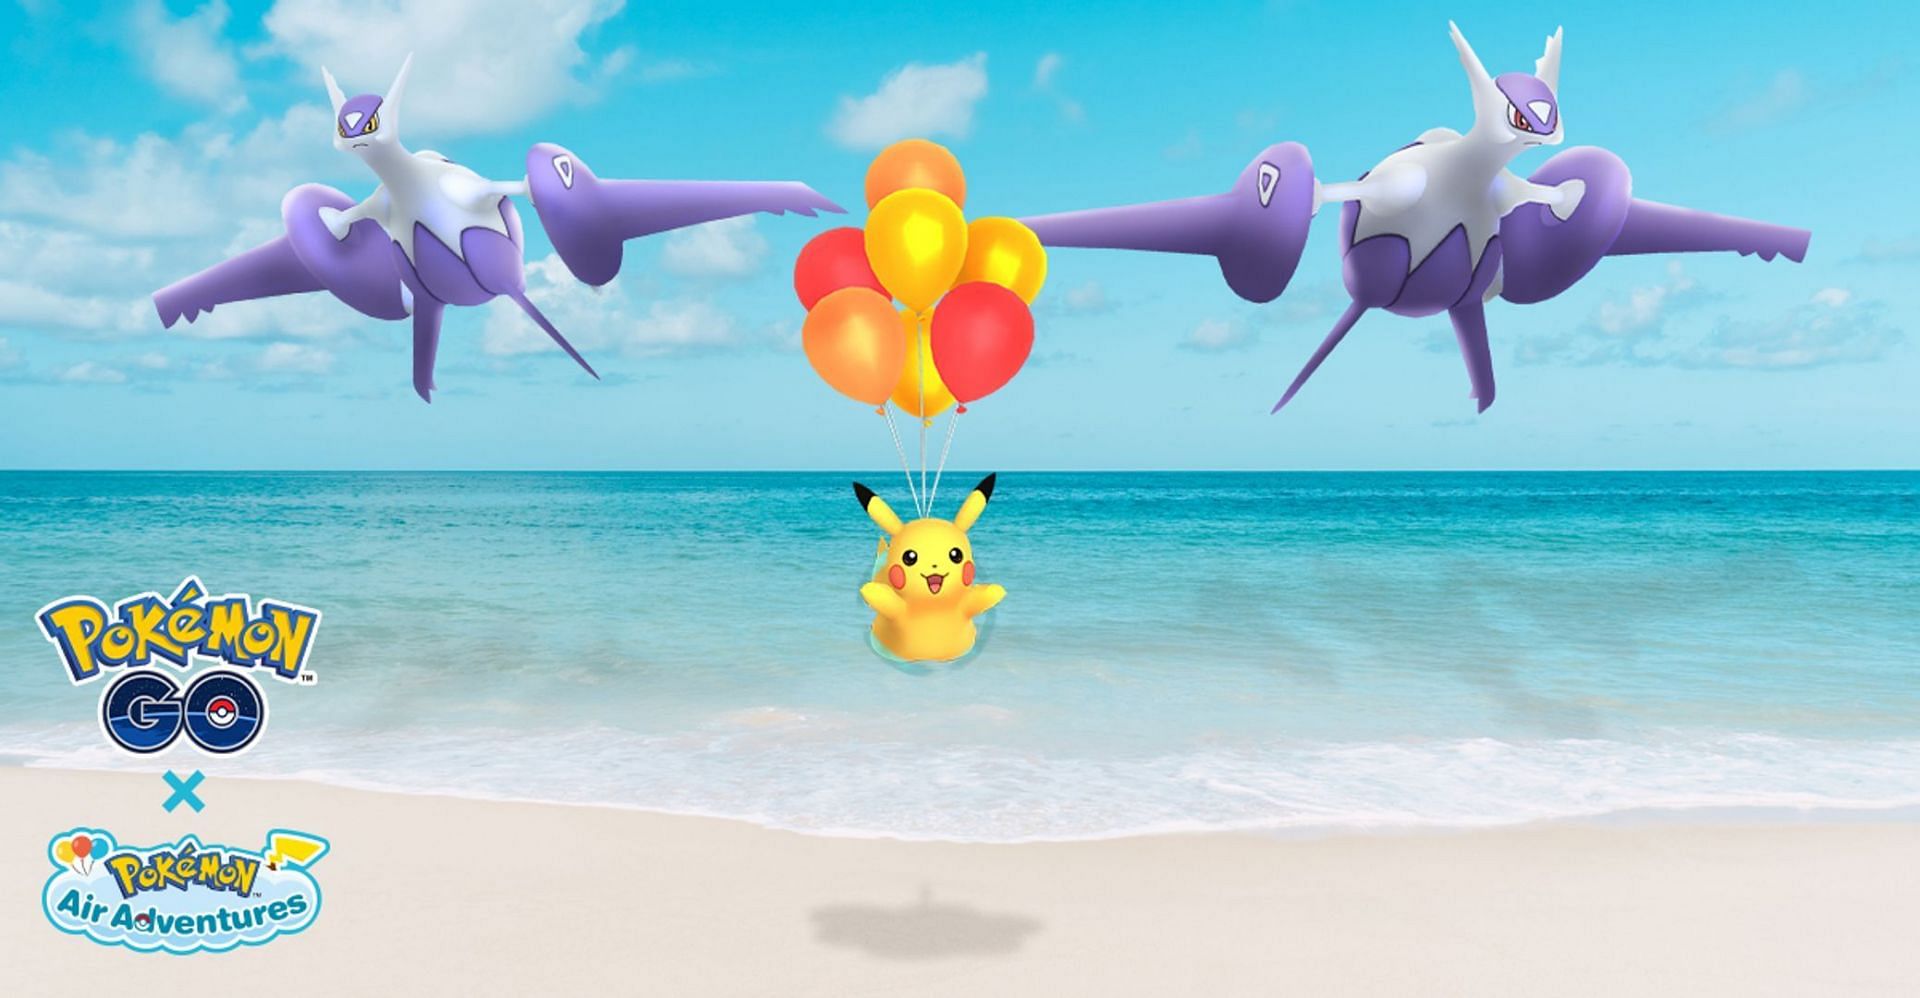 Official artwork for the Air Adventures event in Pokemon GO (Image via Niantic)